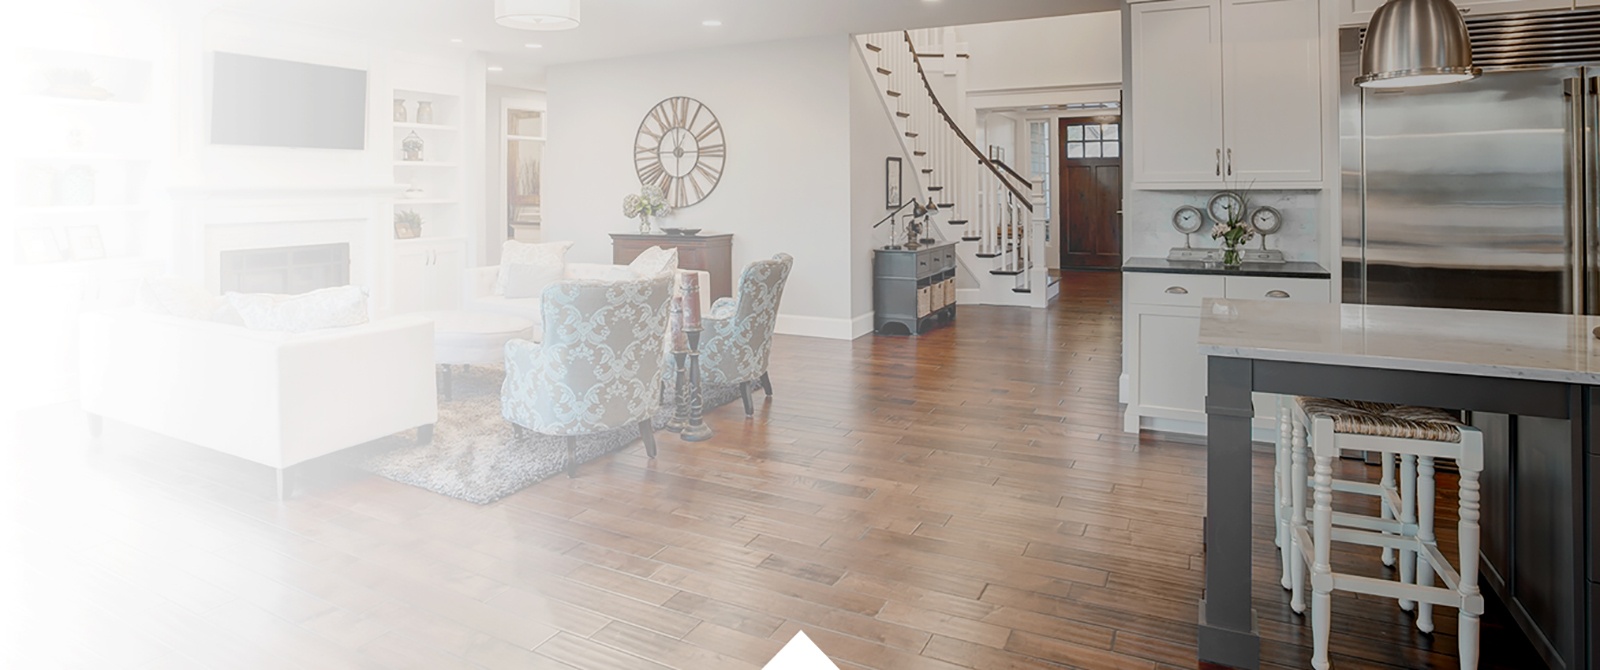 High-Quality & Affordable In-Style Flooring Designs To Wow Your Guests.